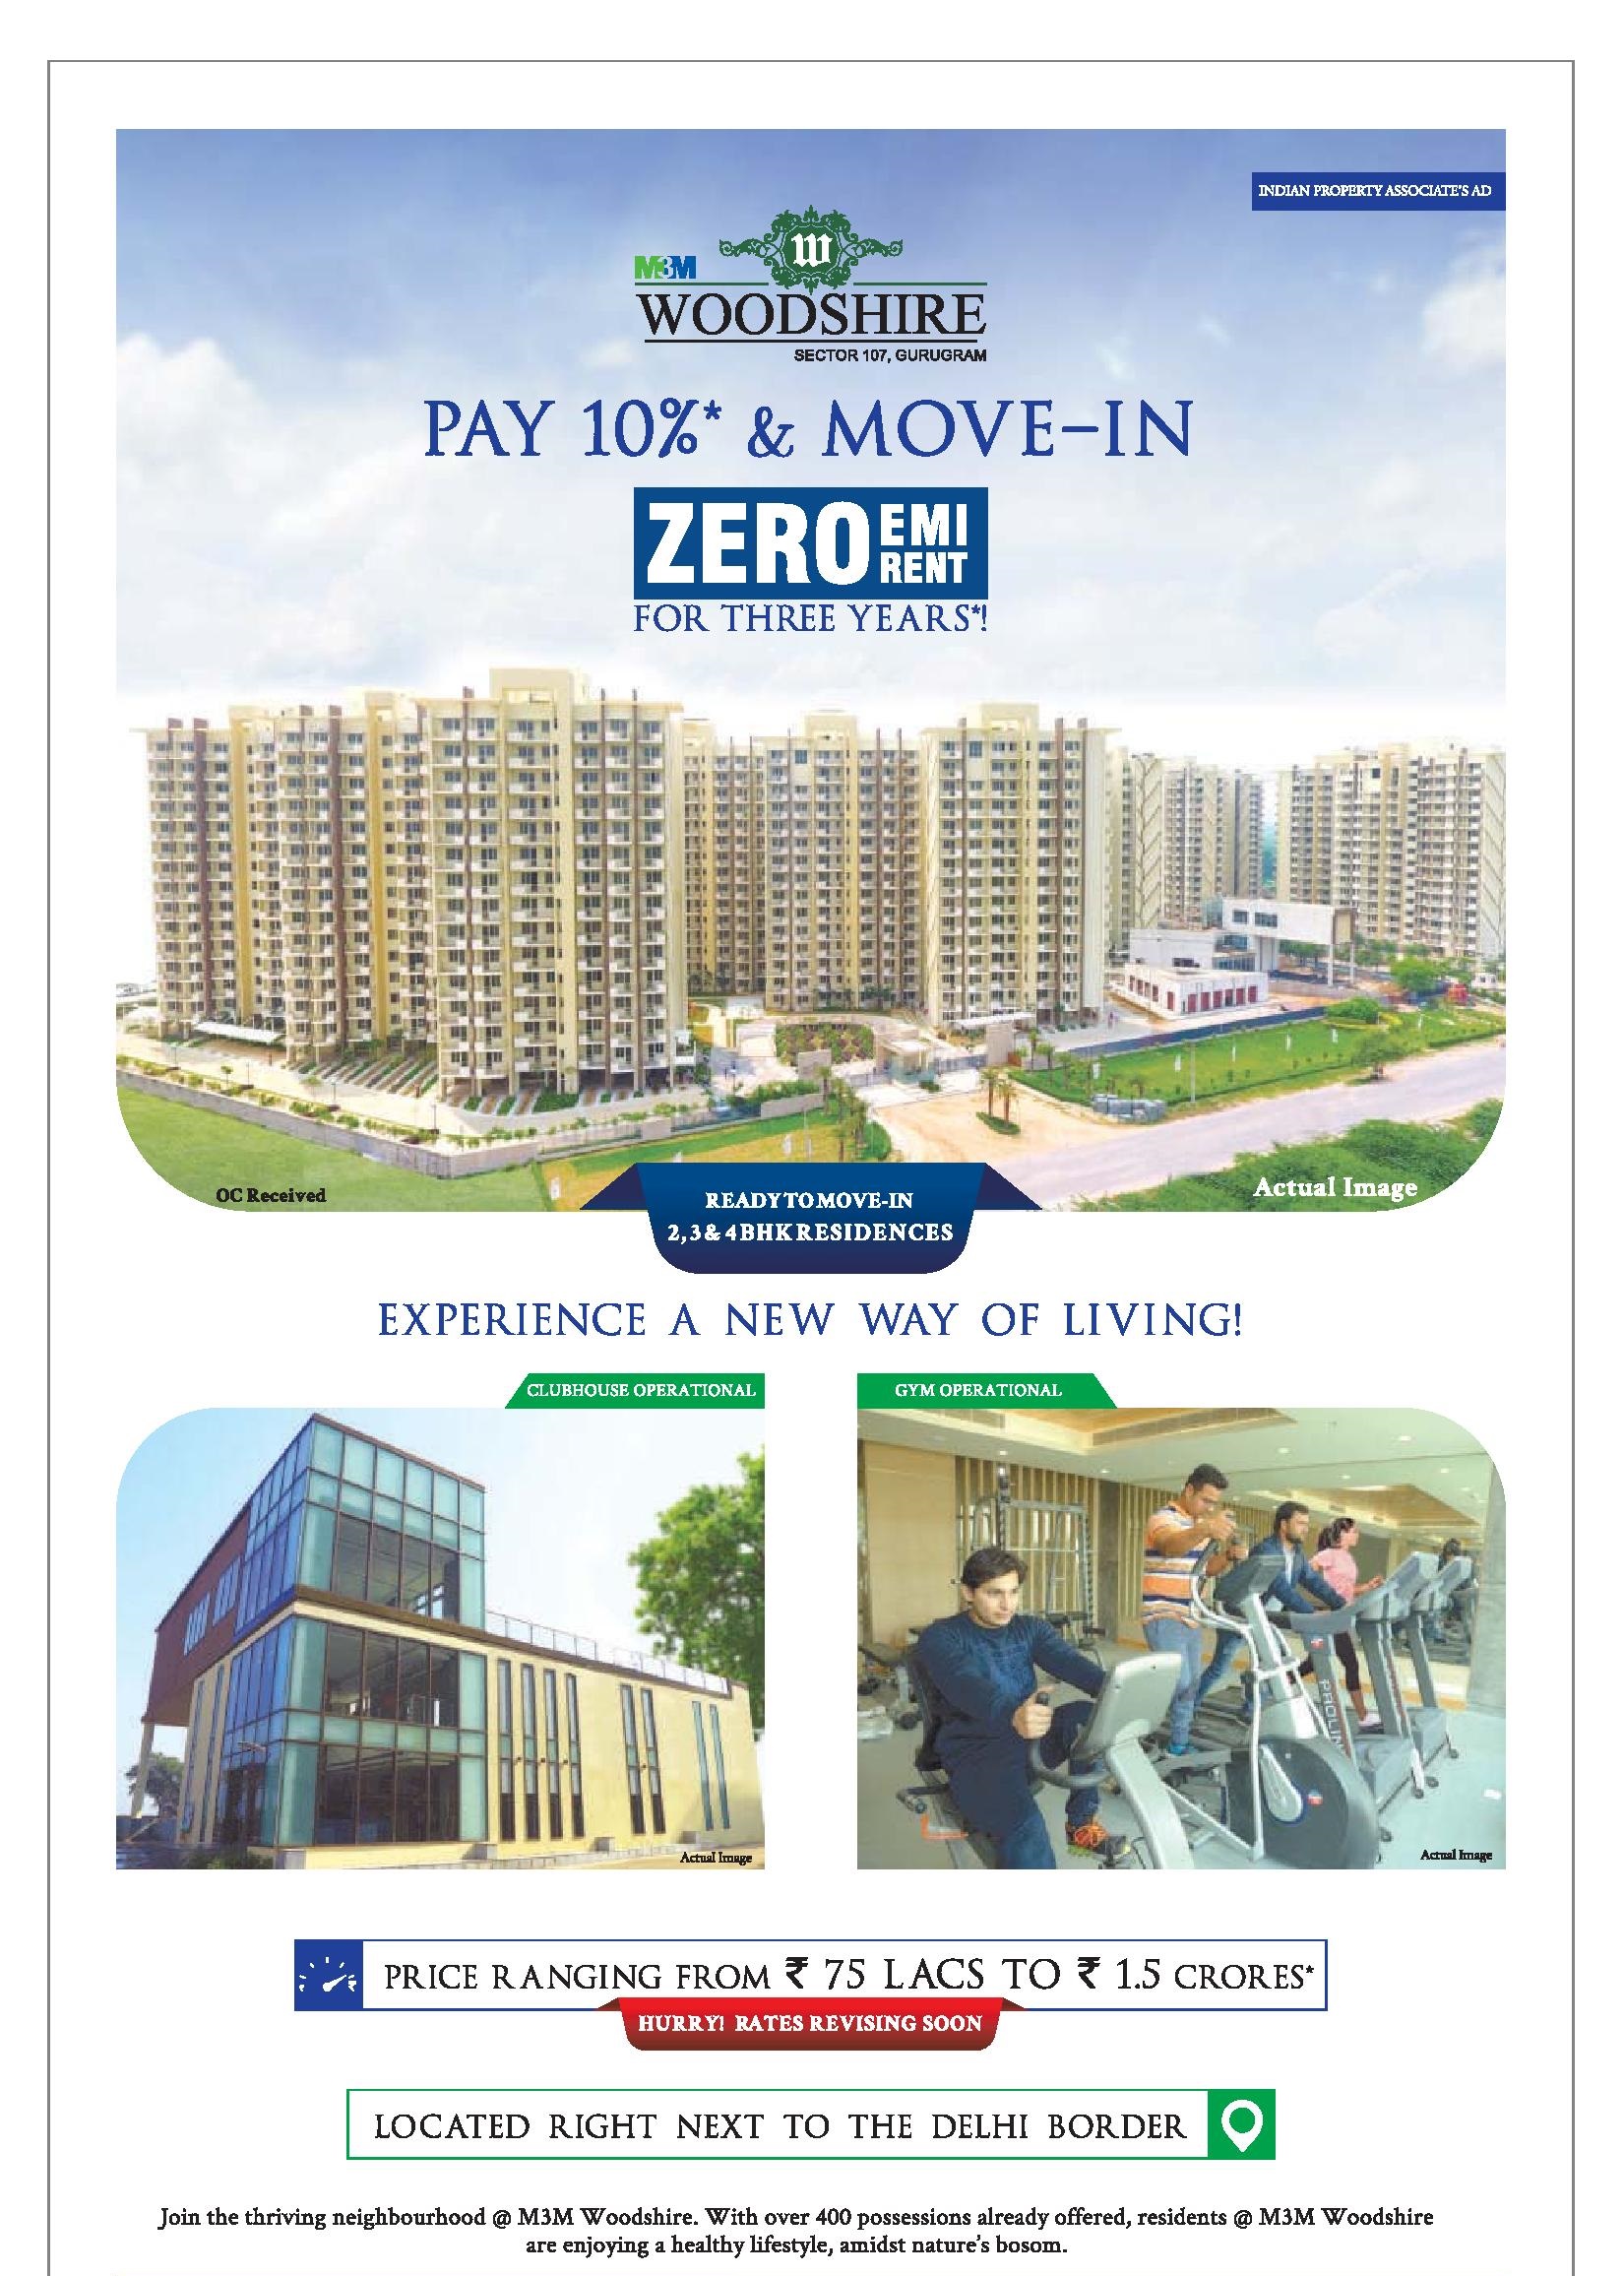 Pay just 10% & move-in at M3M Woodshire in Gurgaon Update